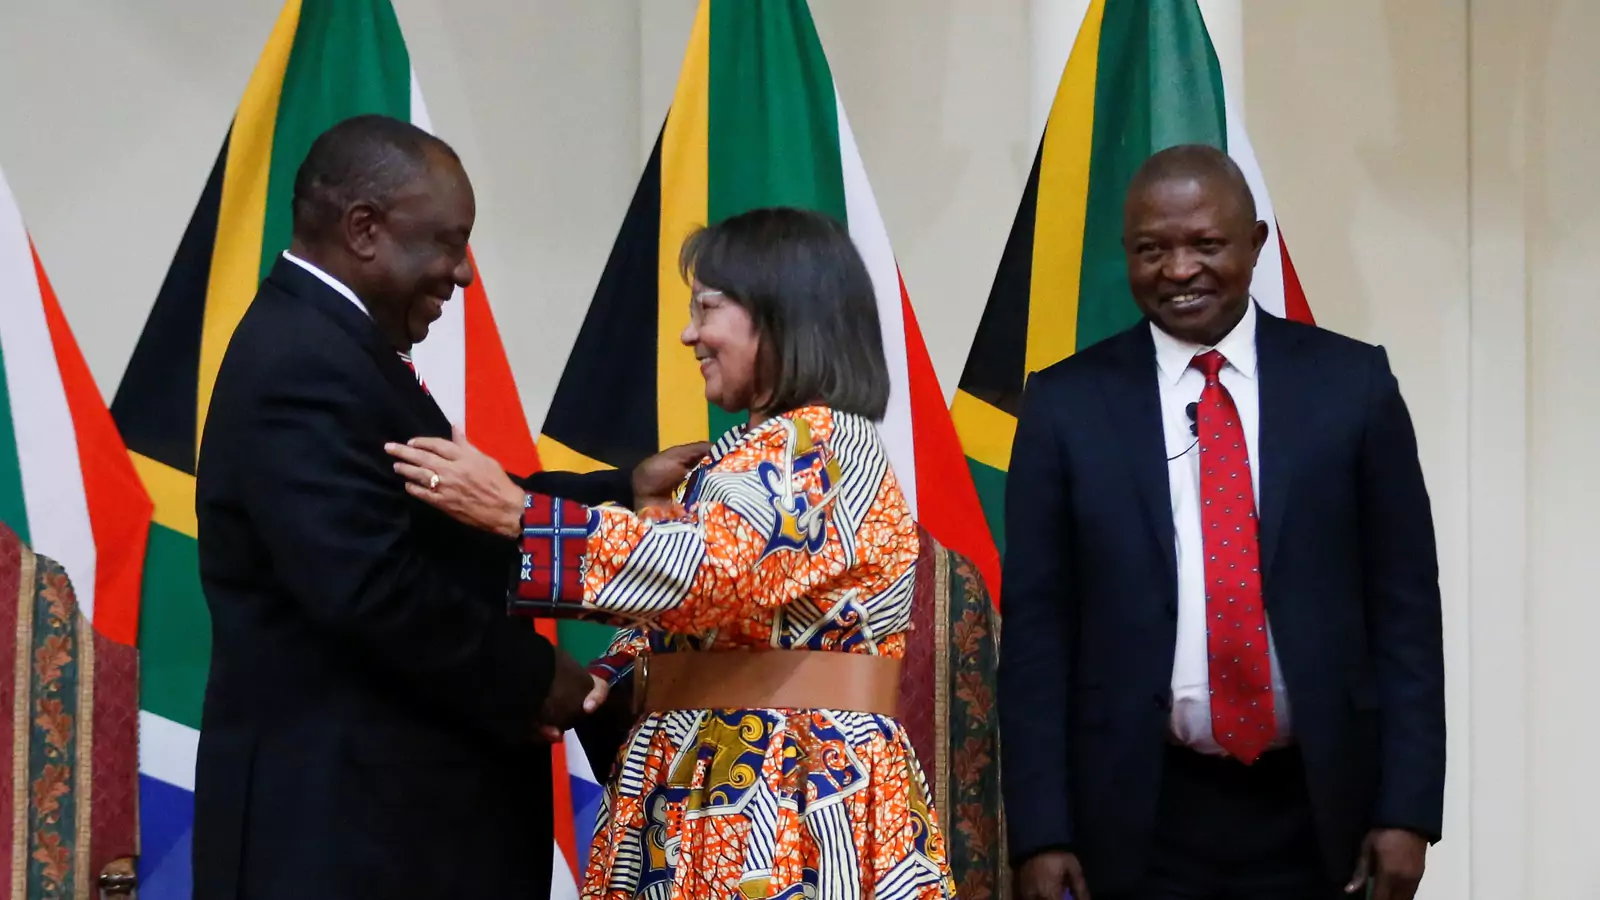 Ramaphosa S Bold Pick For Public Works Minister Of South Africa